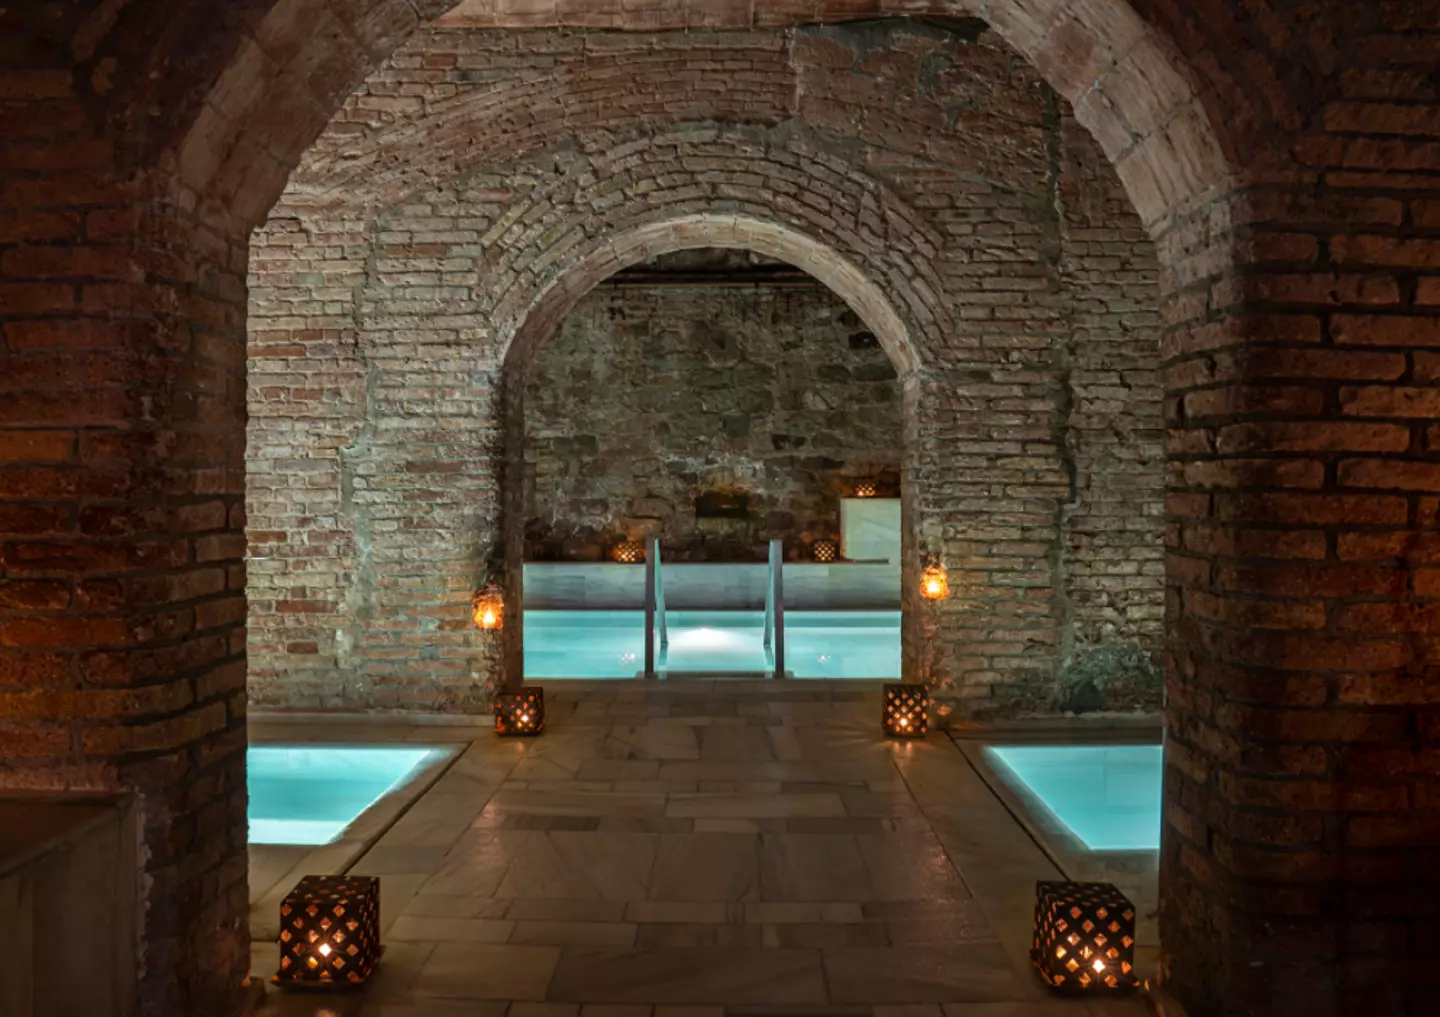 The Roman inspired baths are located underneath Covent Garden in London (